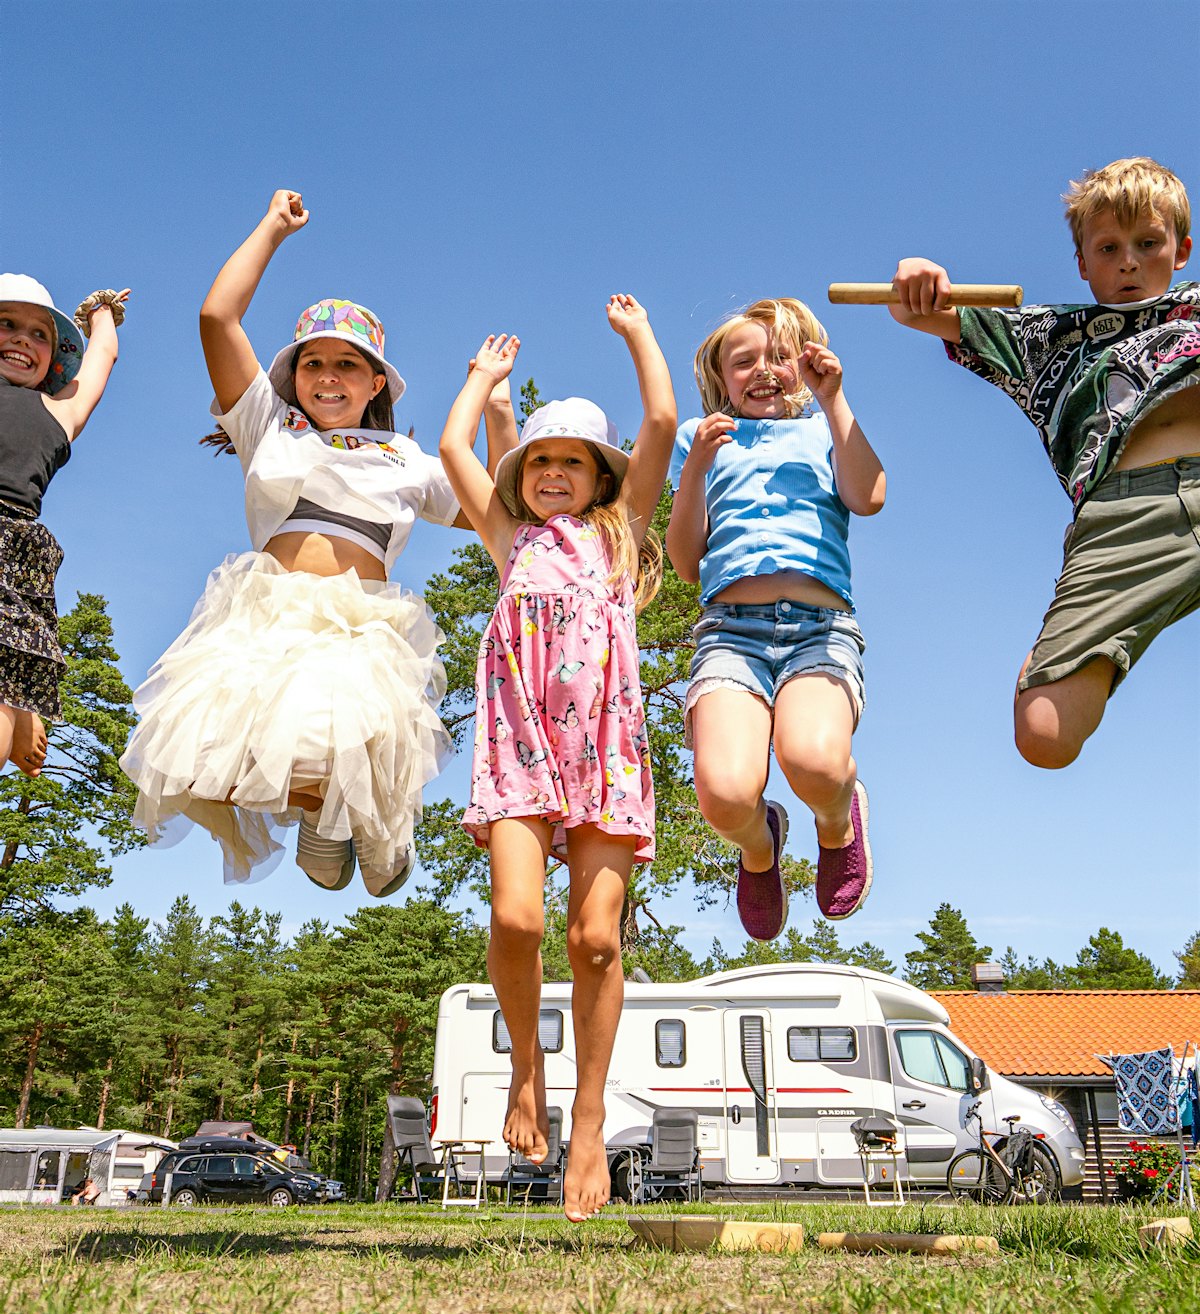 A group of children jump in the air with their hands above their heads at a campsite. Everyone smiles big. Photo